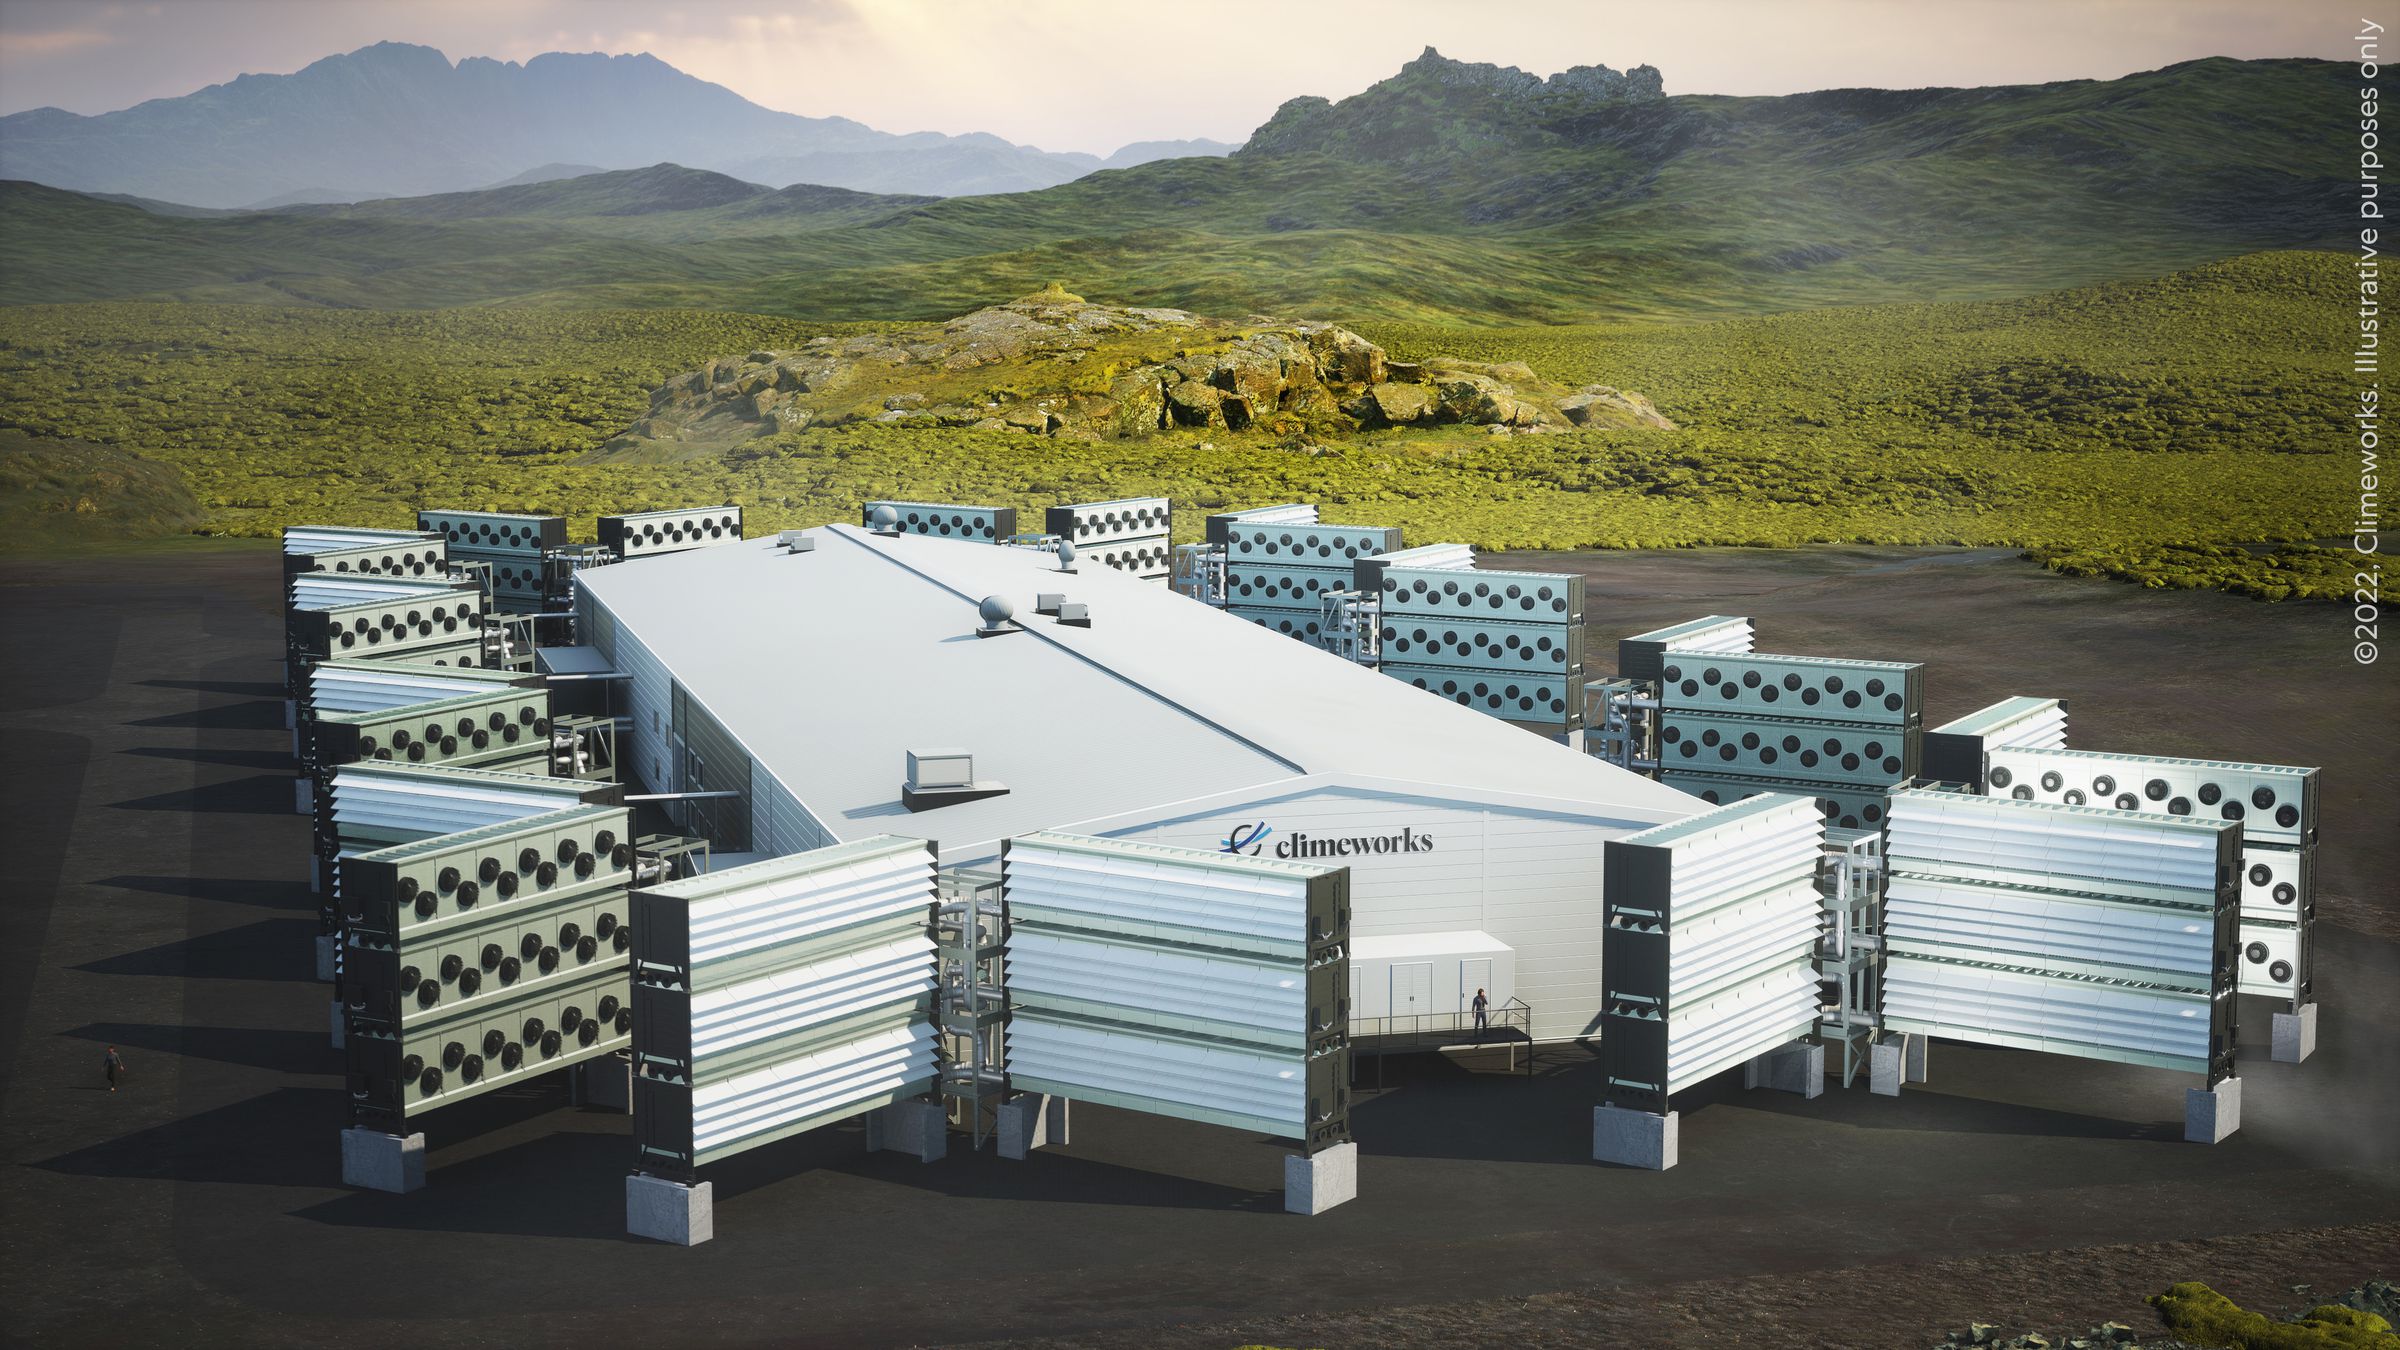 An illustration of what Climeworks’ new direct air capture plant, Mammoth, will look like once completed.